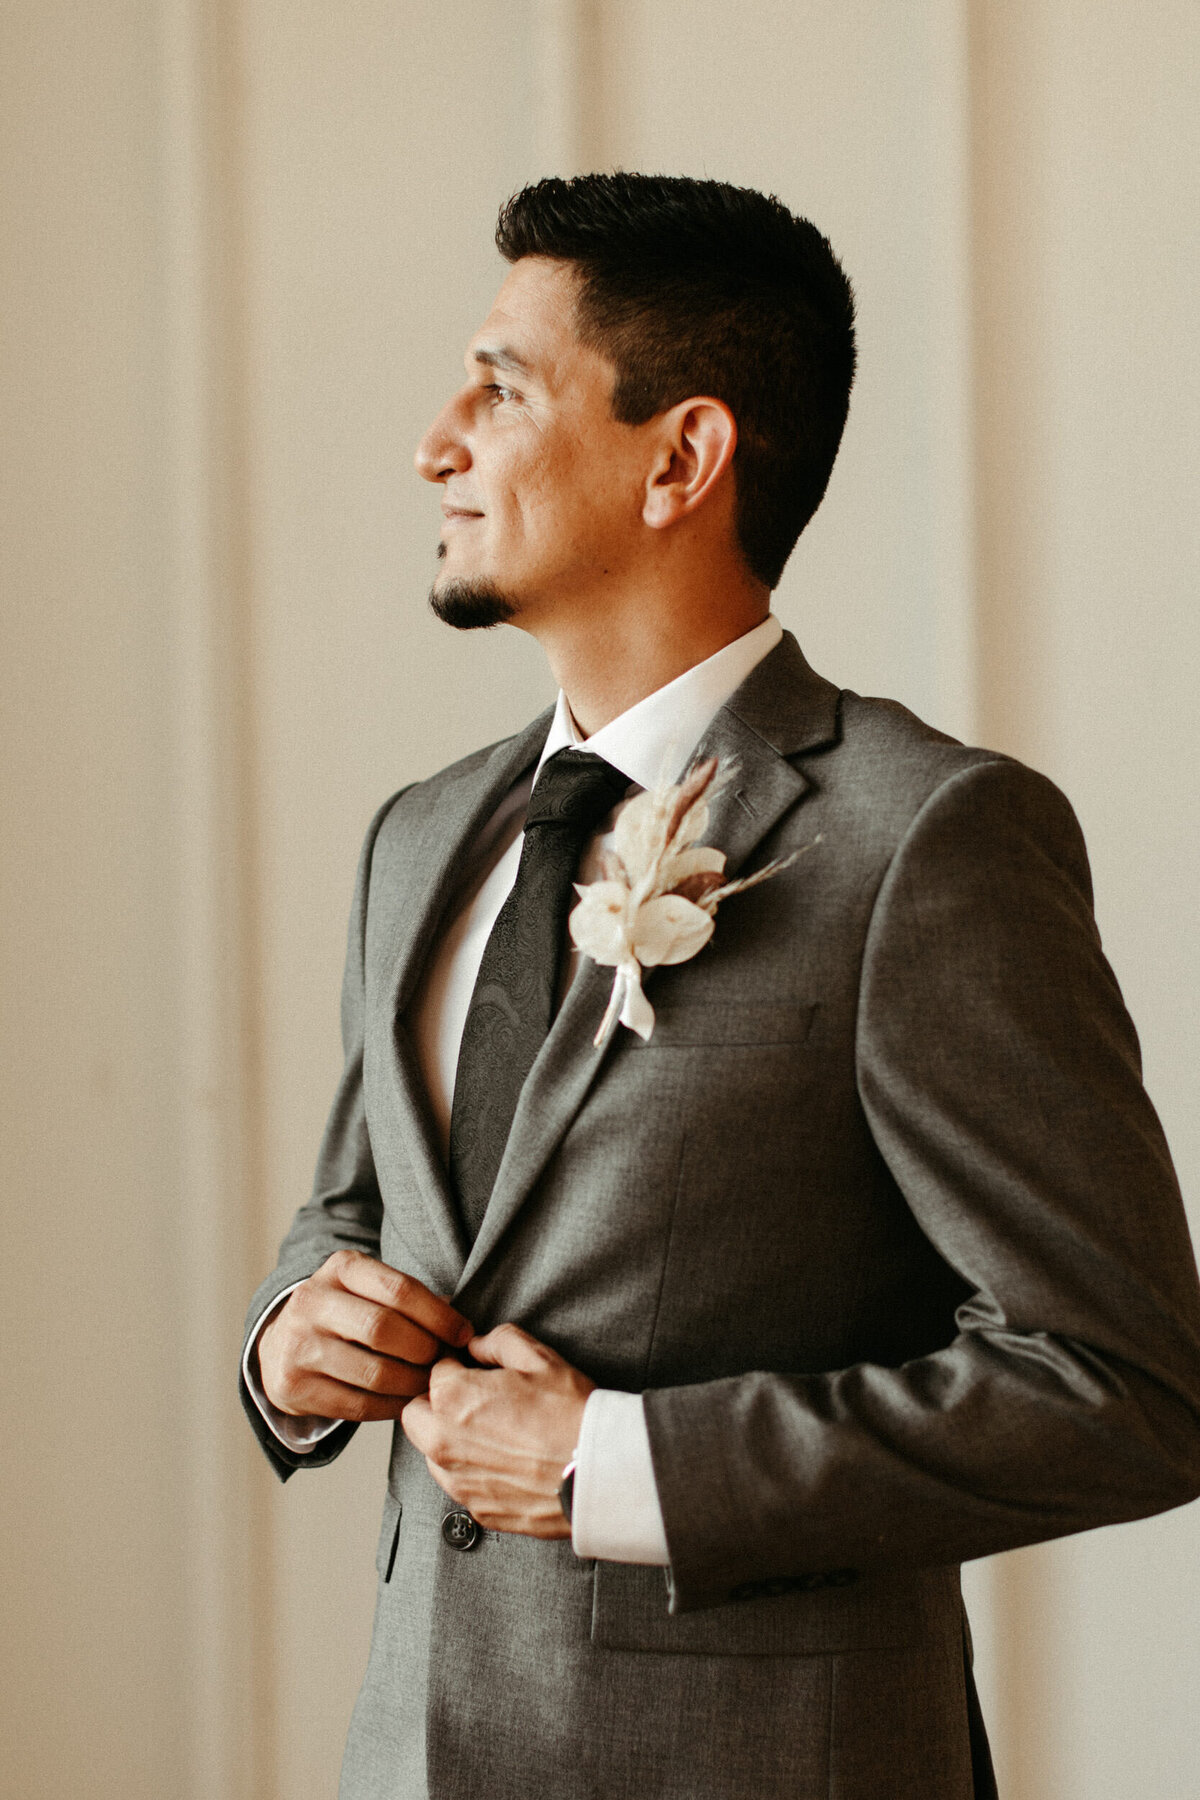 Groom buttoning his grey suit and looking out the window